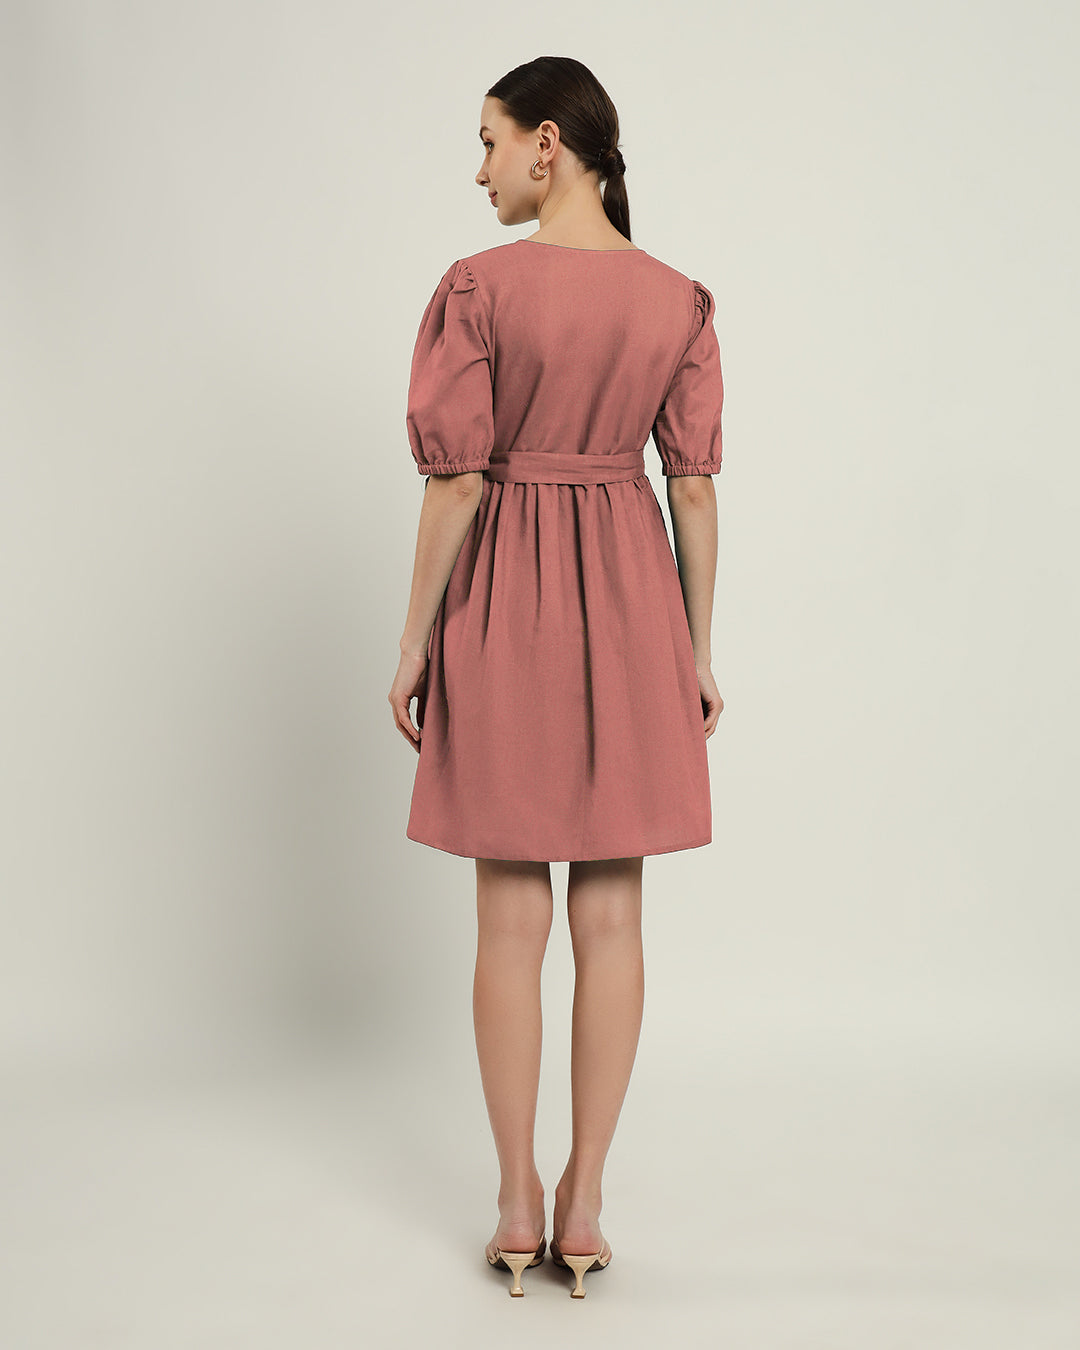 The Inzai Ivory Pink Dress